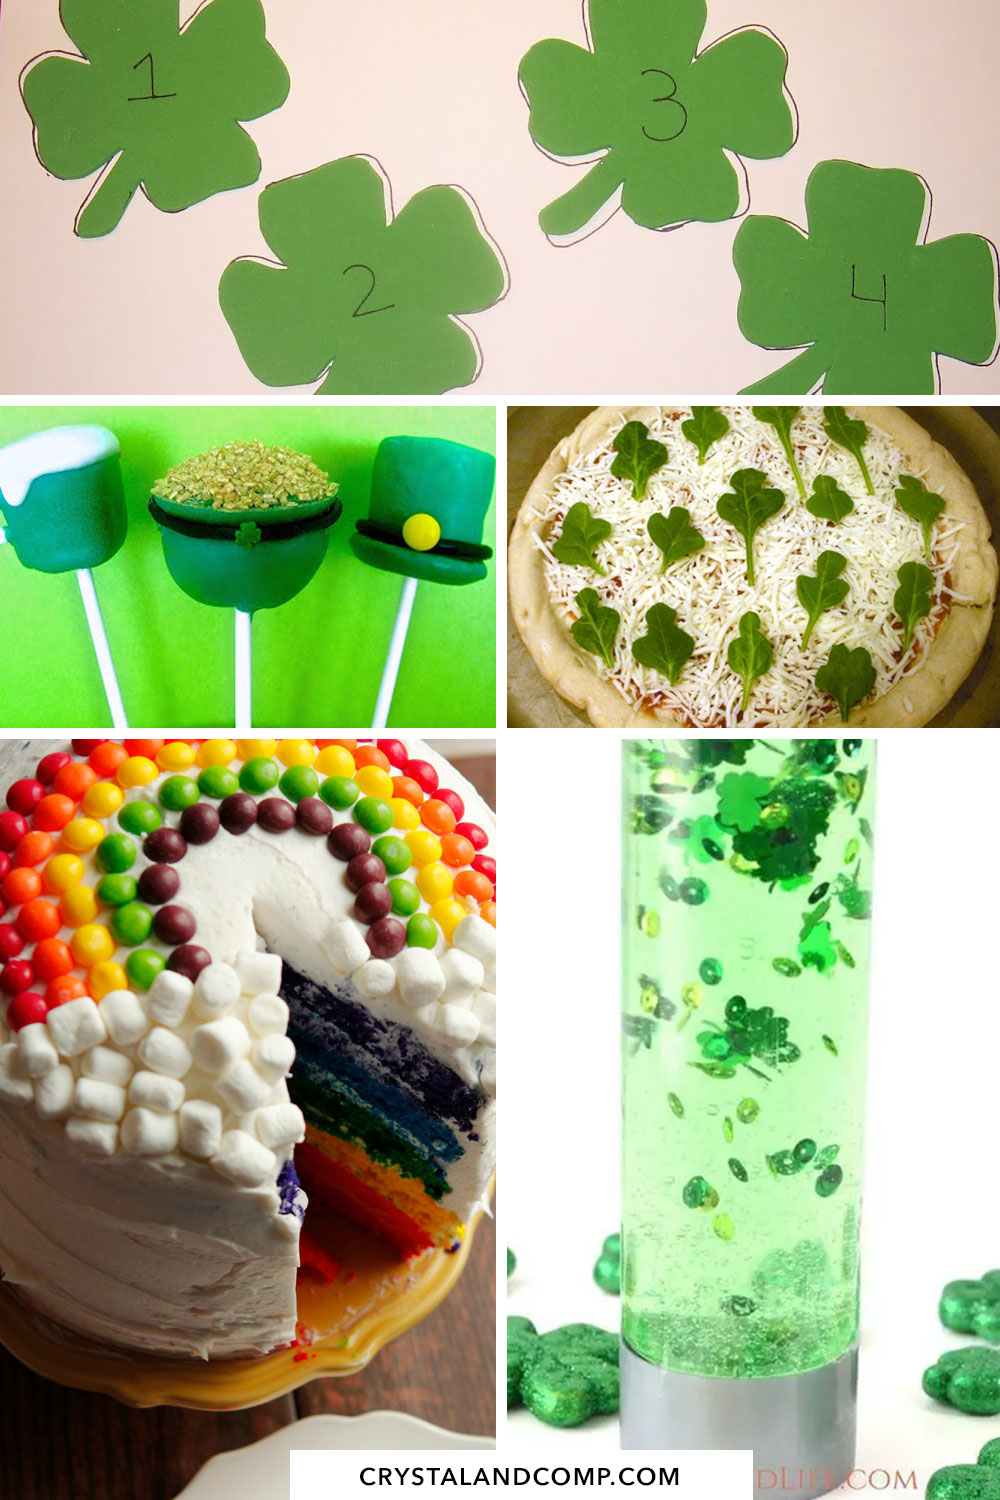 st patricks day crafts and activities